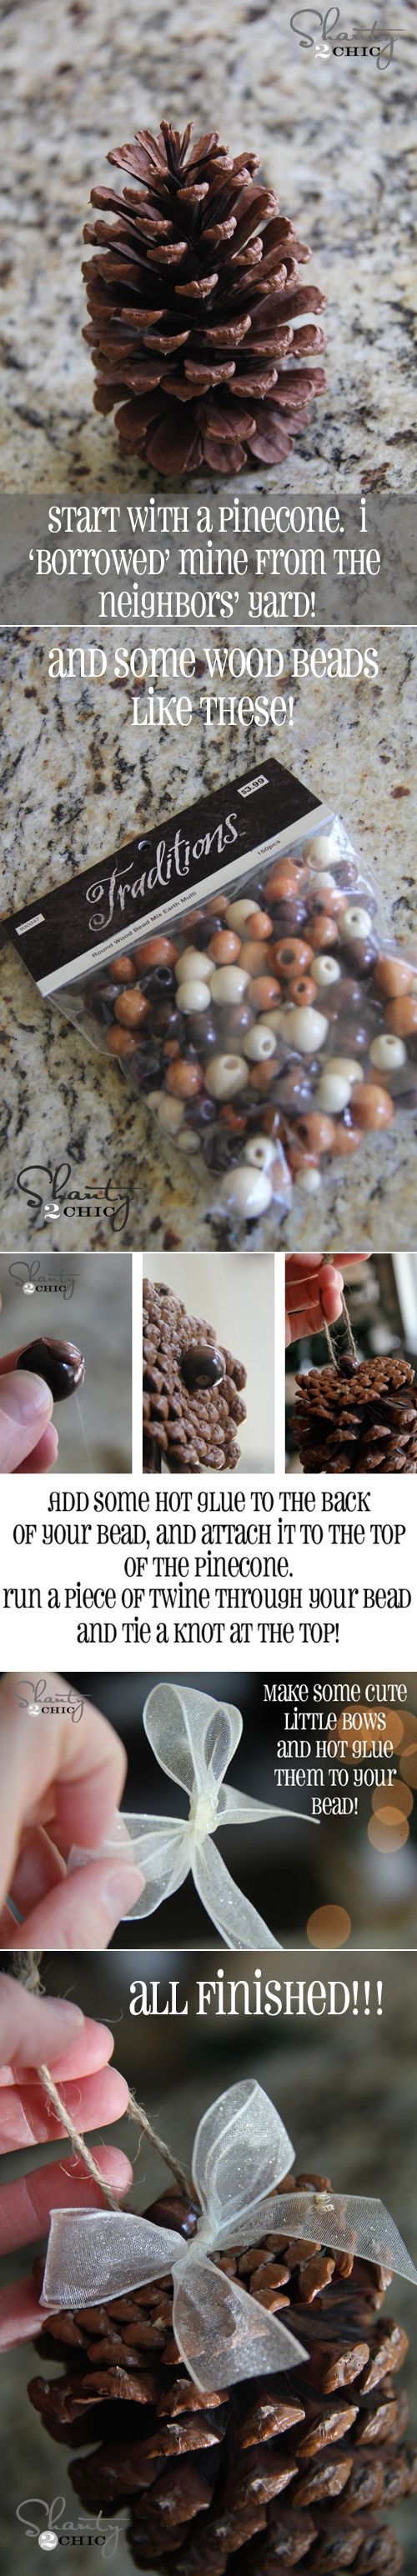 DIY Pinecone Ornaments (hot glue a wooden bead to the bottom of your pinecone)